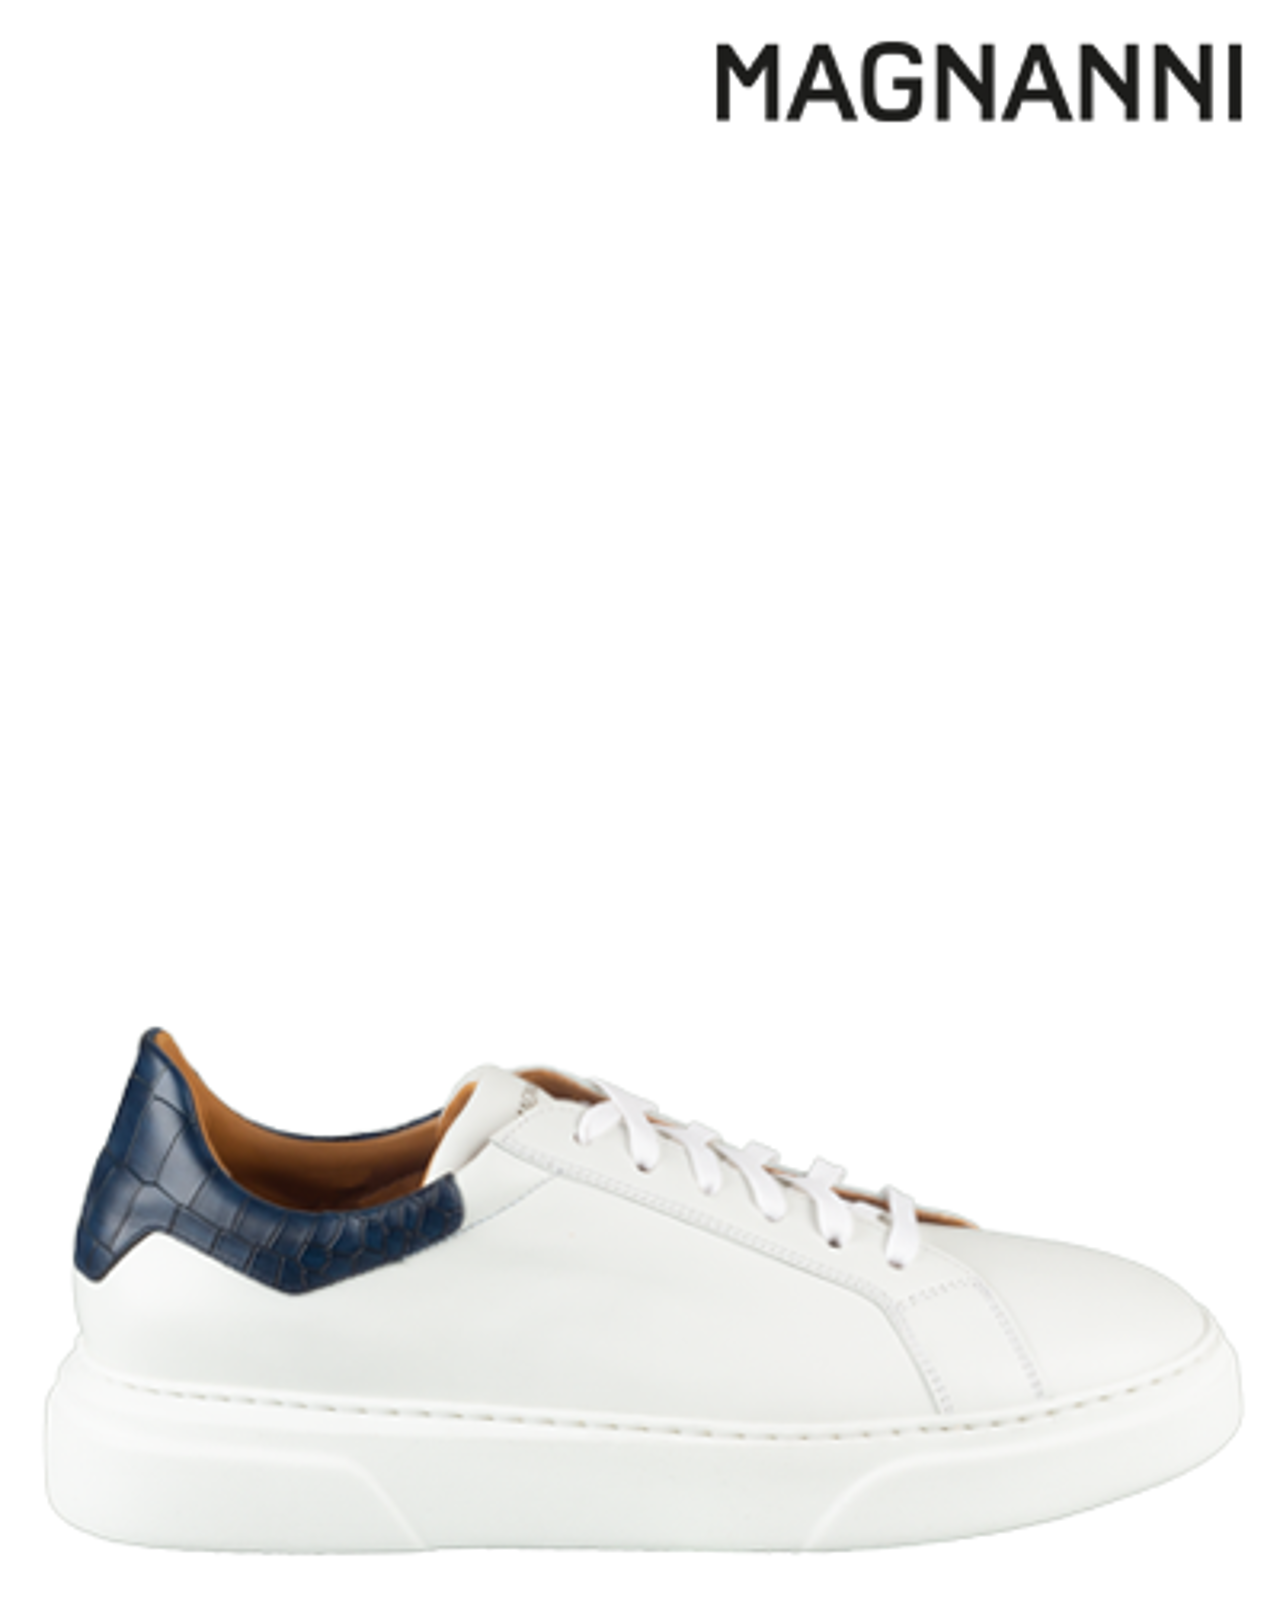 Magnanni 23825 Sneakers | MONFRANCE shoes Maastricht